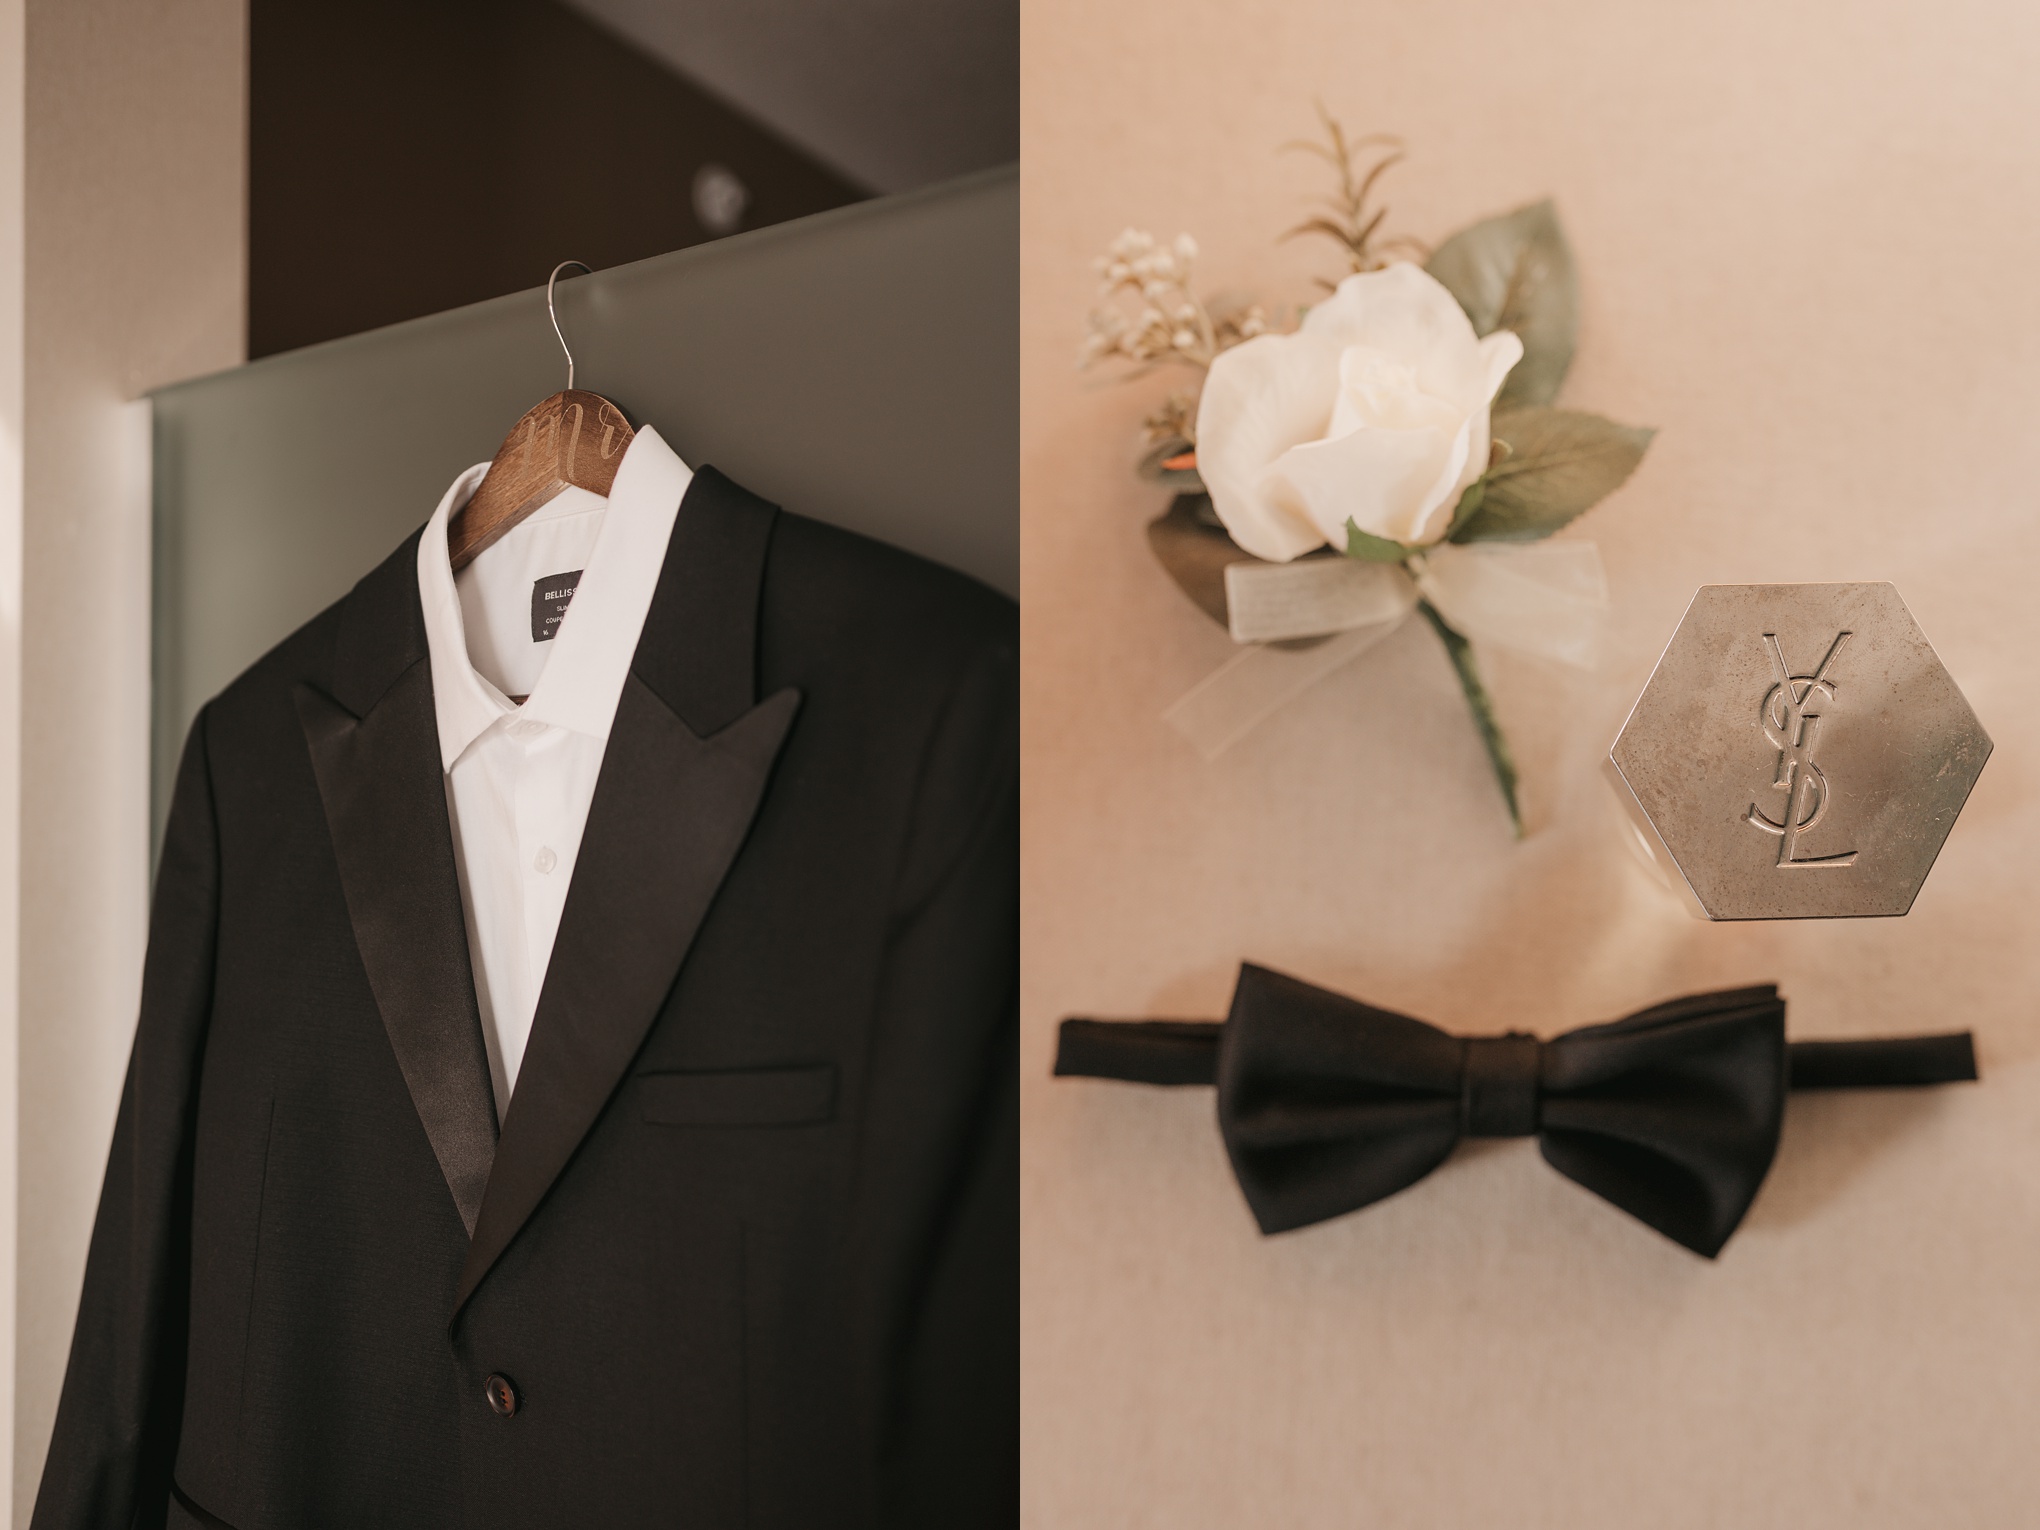 Groom details and getting ready photos